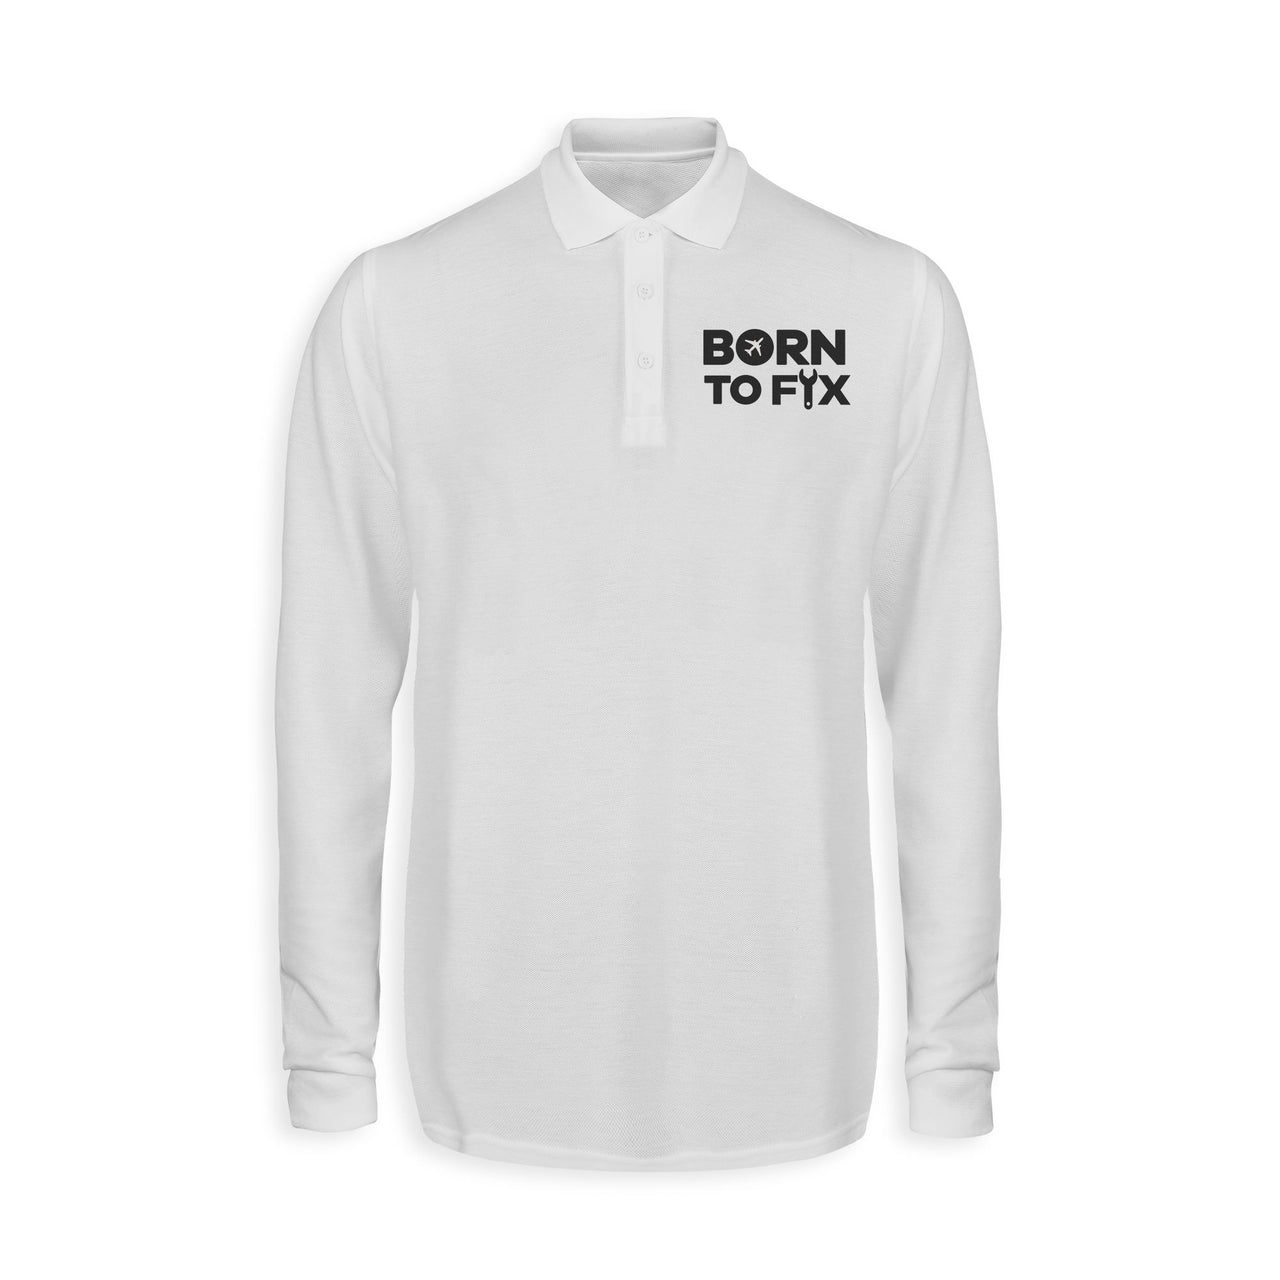 Born To Fix Airplanes Designed Long Sleeve Polo T-Shirts